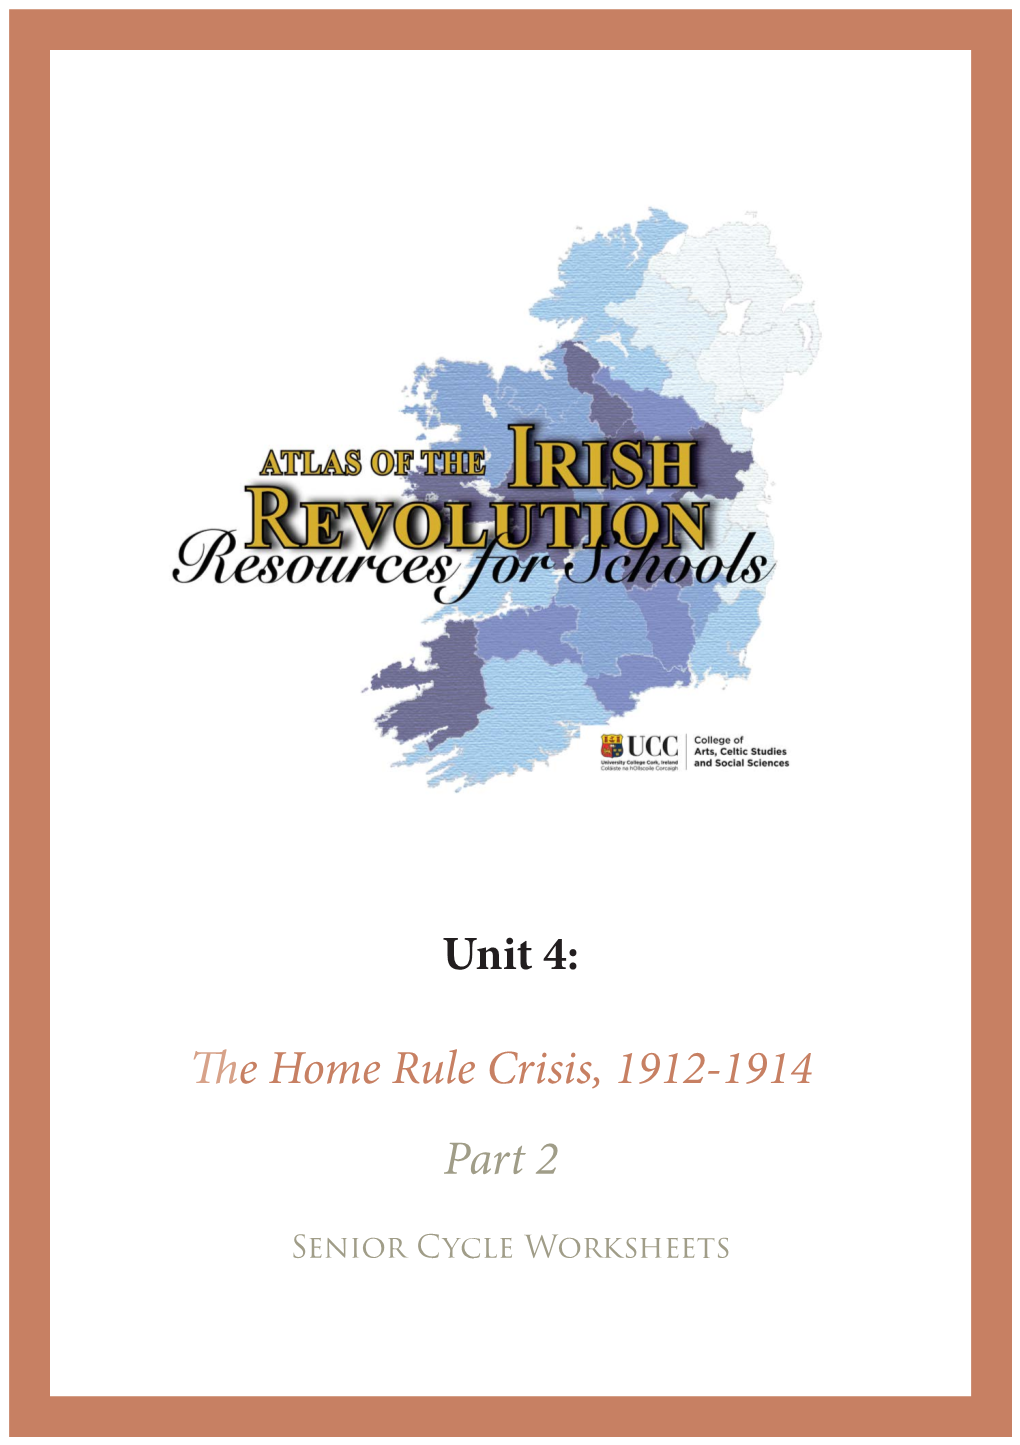 The Home Rule Crisis, 1912-1914 Part 2